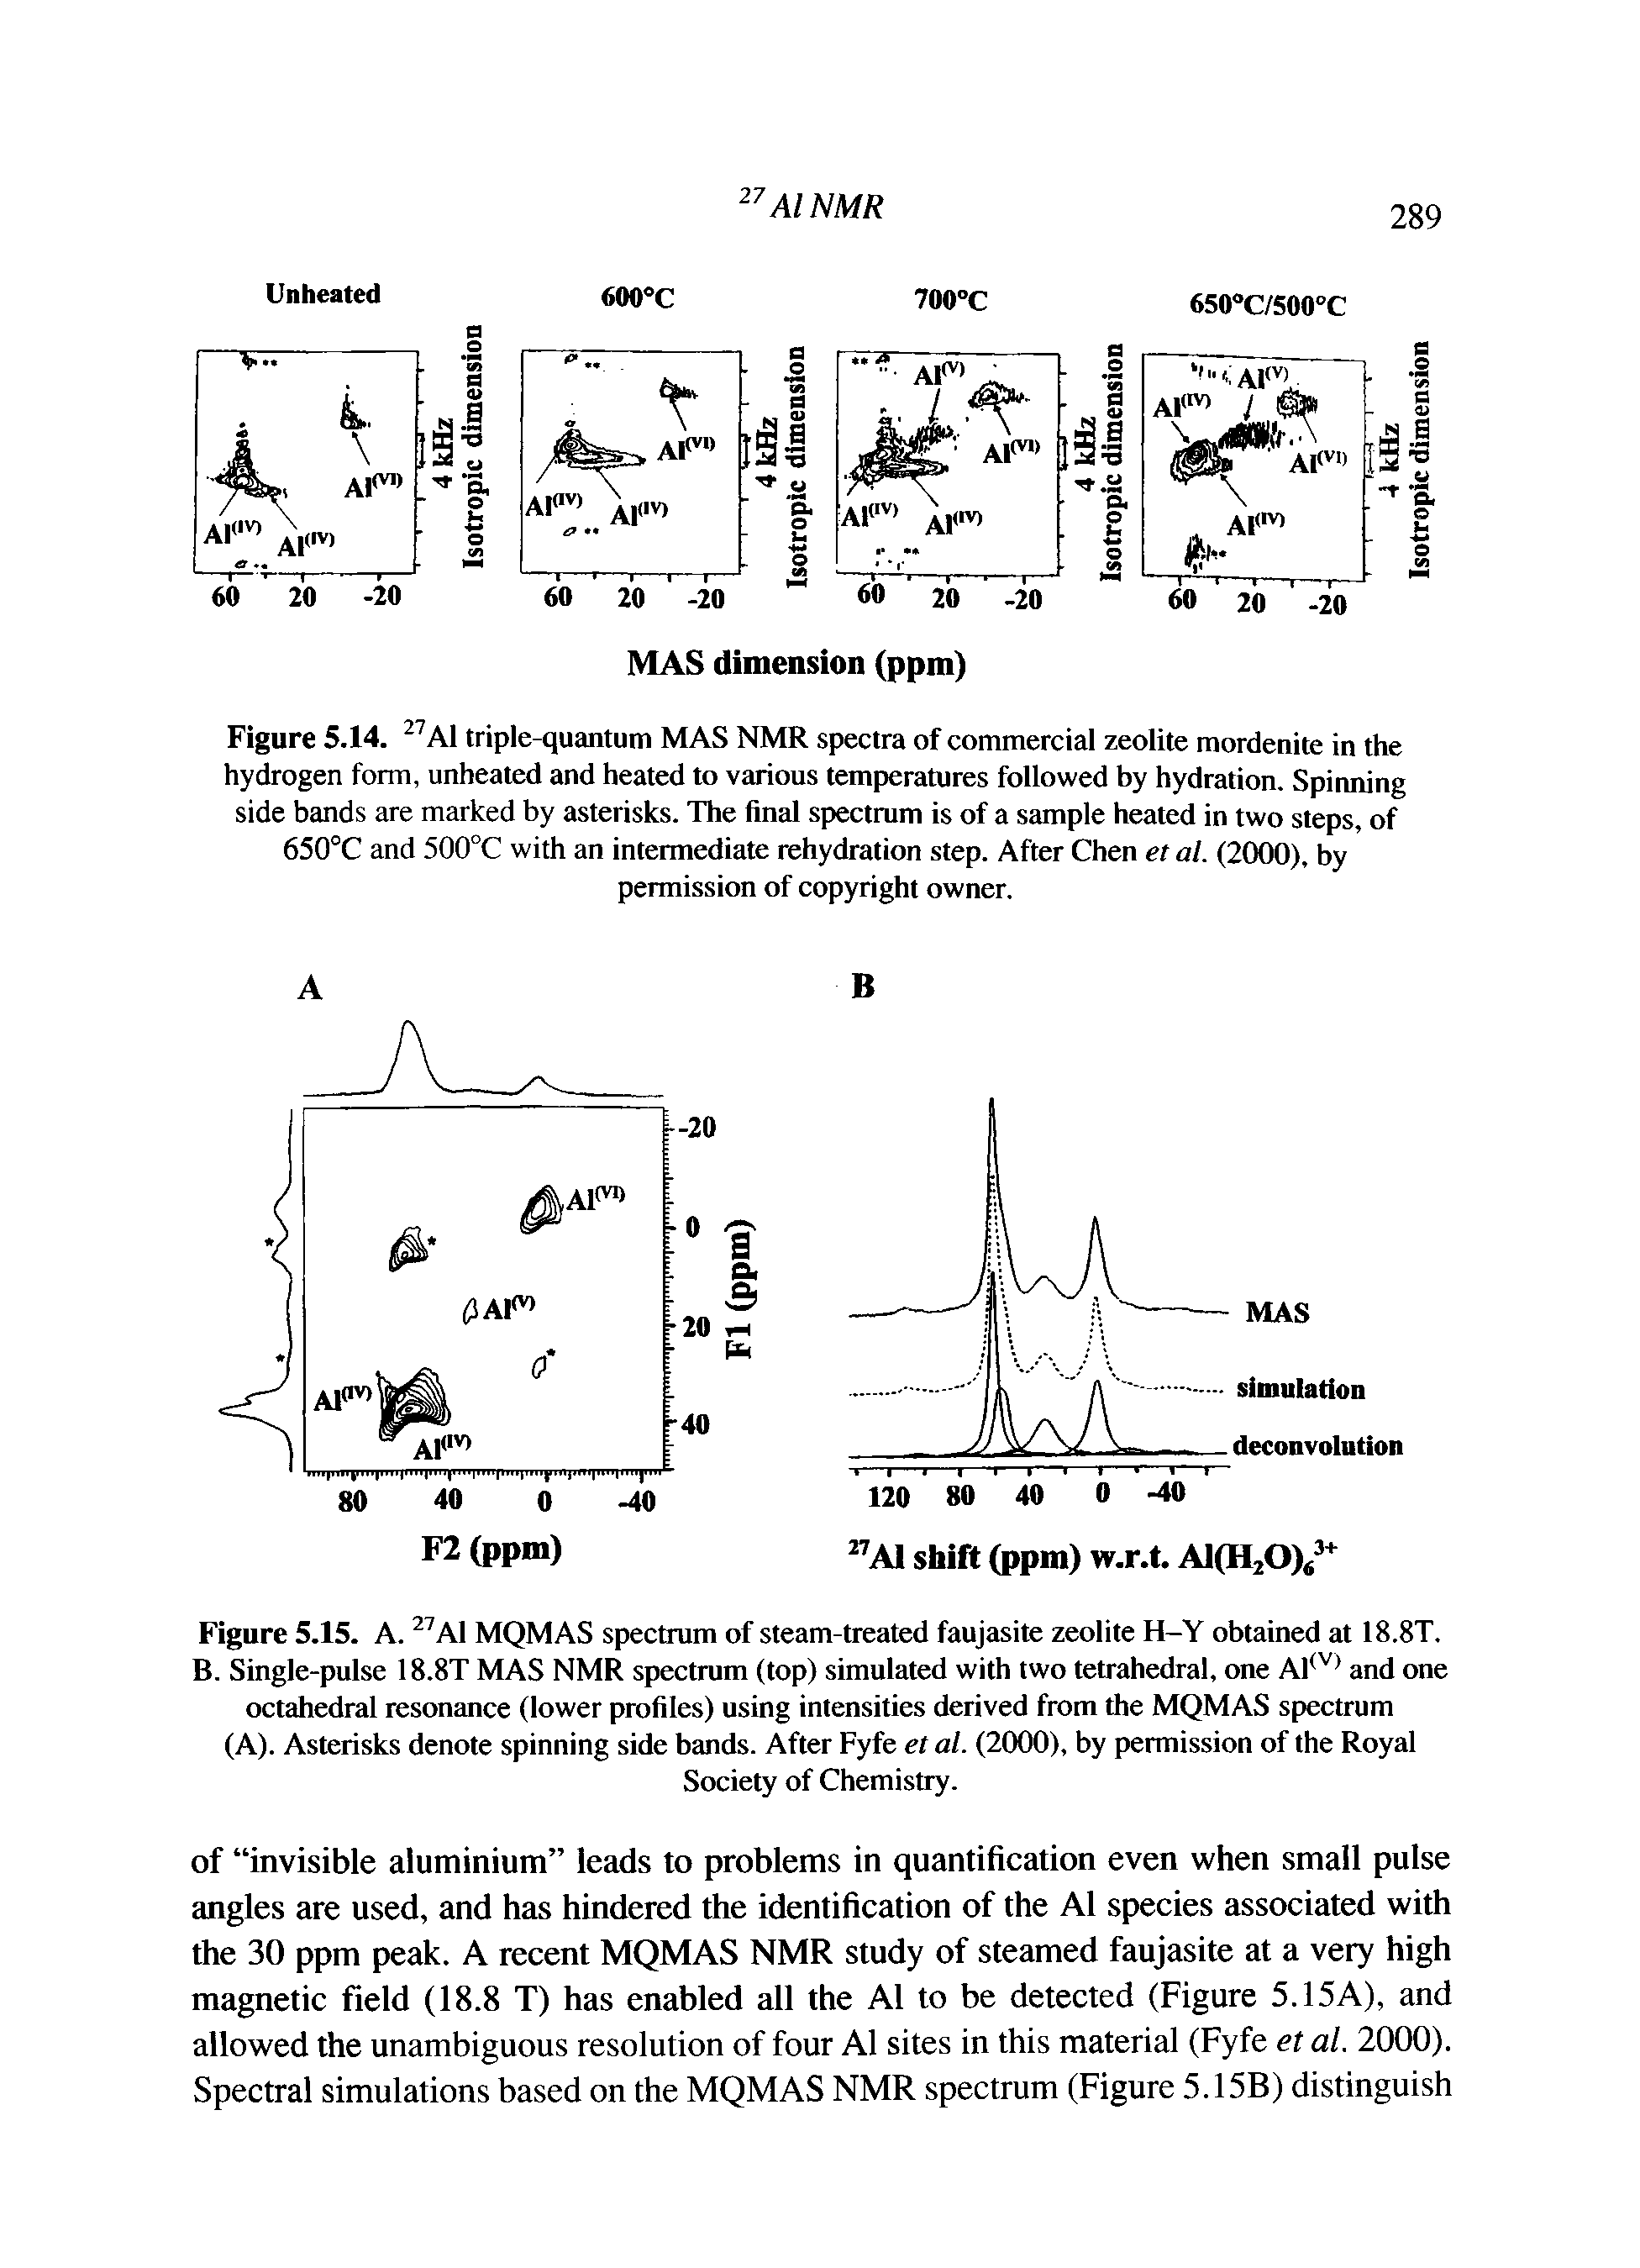 Figure 5.14. Al triple-quantum MAS NMR spectra of commercial zeolite mordenite in the hydrogen form, unheated and heated to various temperatures followed by hydration. Spinning side bands are marked by asterisks. The final spectrum is of a sample heated in two steps, of 650°C and 500°C with an intermediate rehydration step. After Chen et al. (2000), by permission of copyright owner.